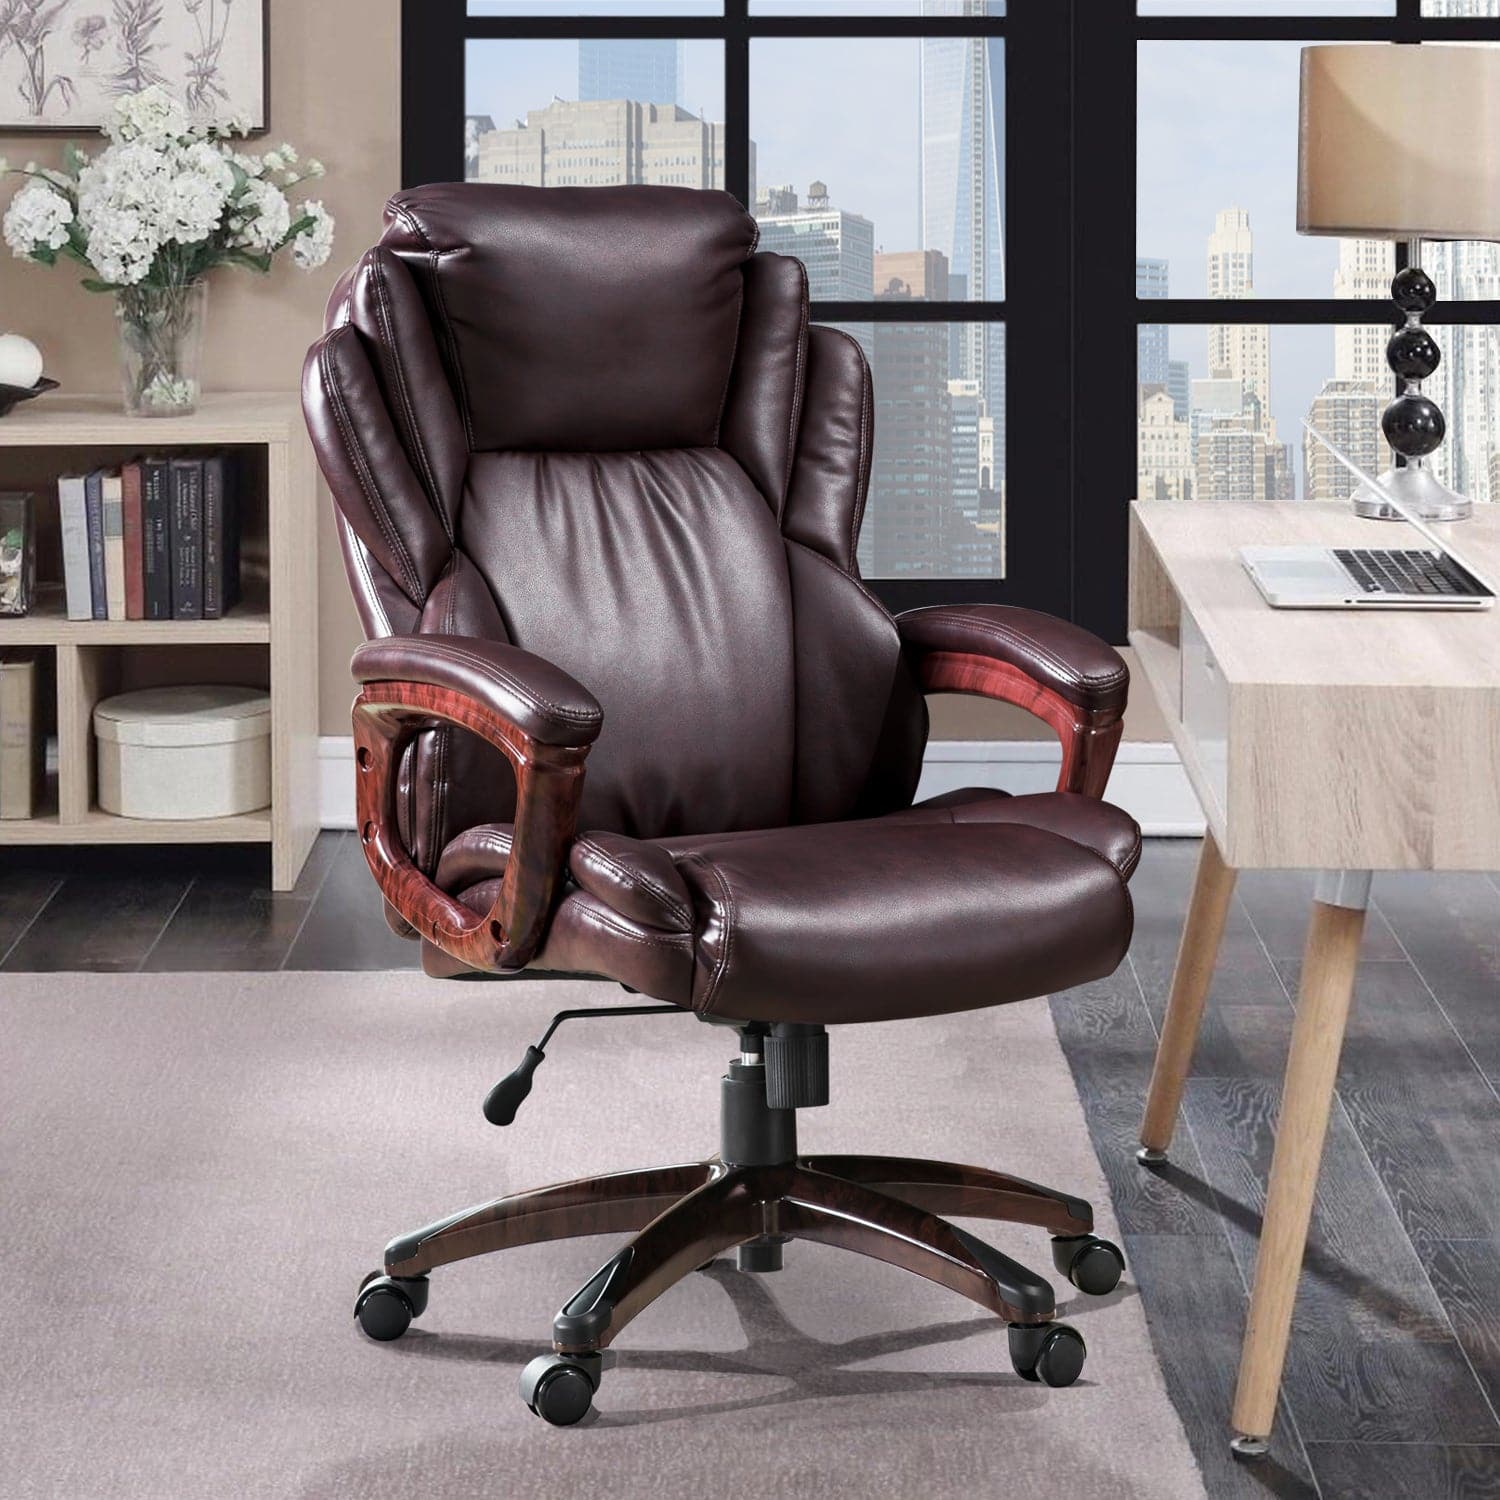 Fighting Fatigue at Work: Choosing the Right Office Chair for Health and Productivity